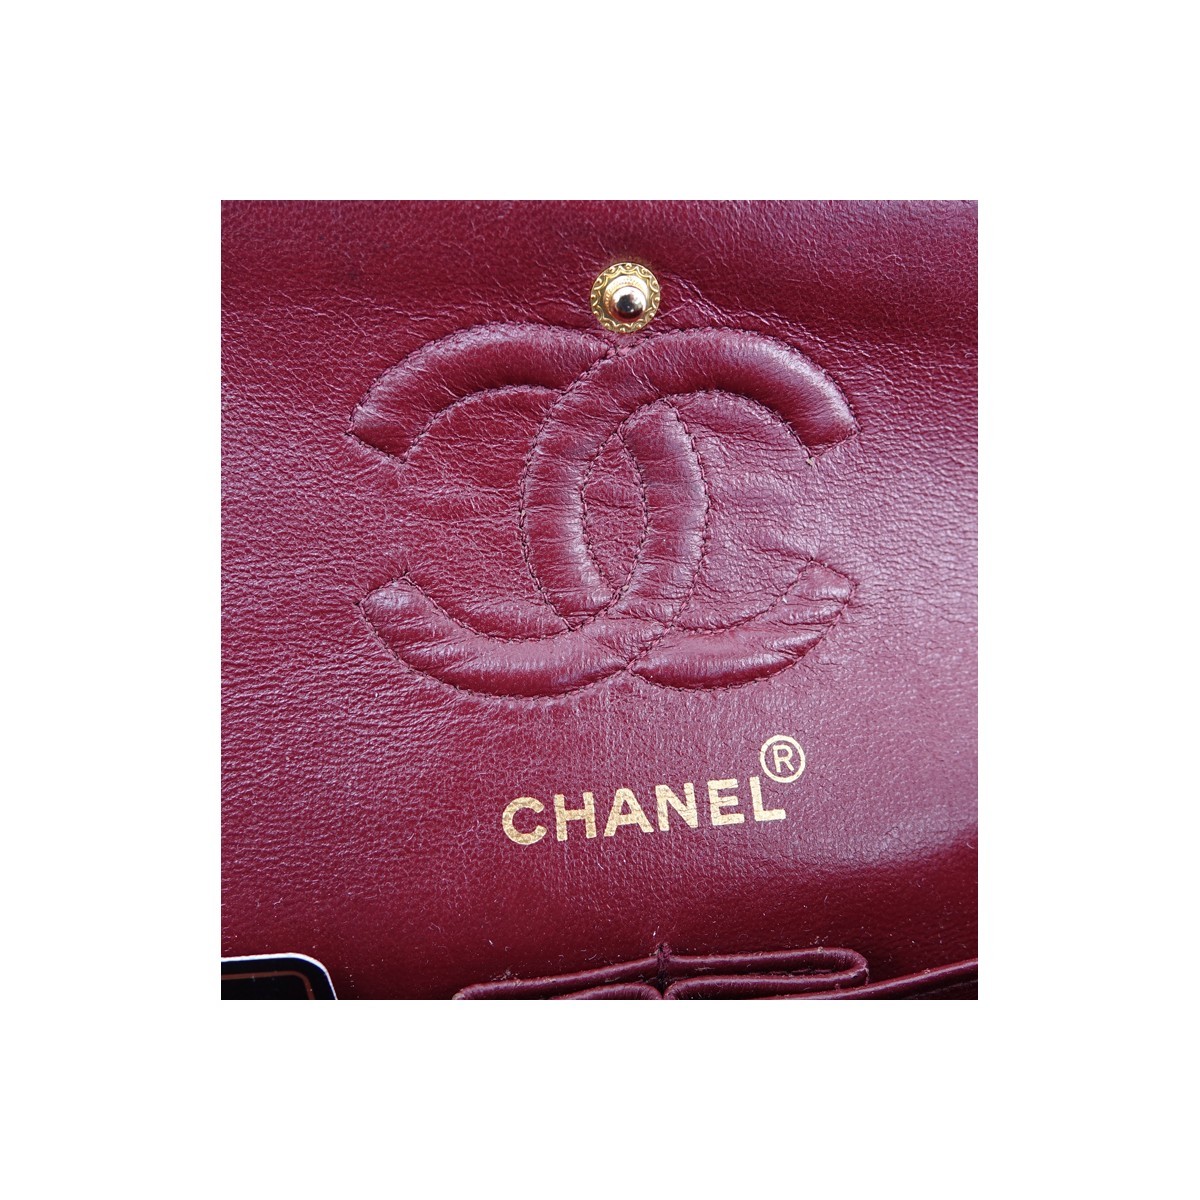 Chanel Black Quilted Leather Classic Double Flap 23 Handbag. Gold tone hardware, burgundy leather interior with patch and zippered pockets.